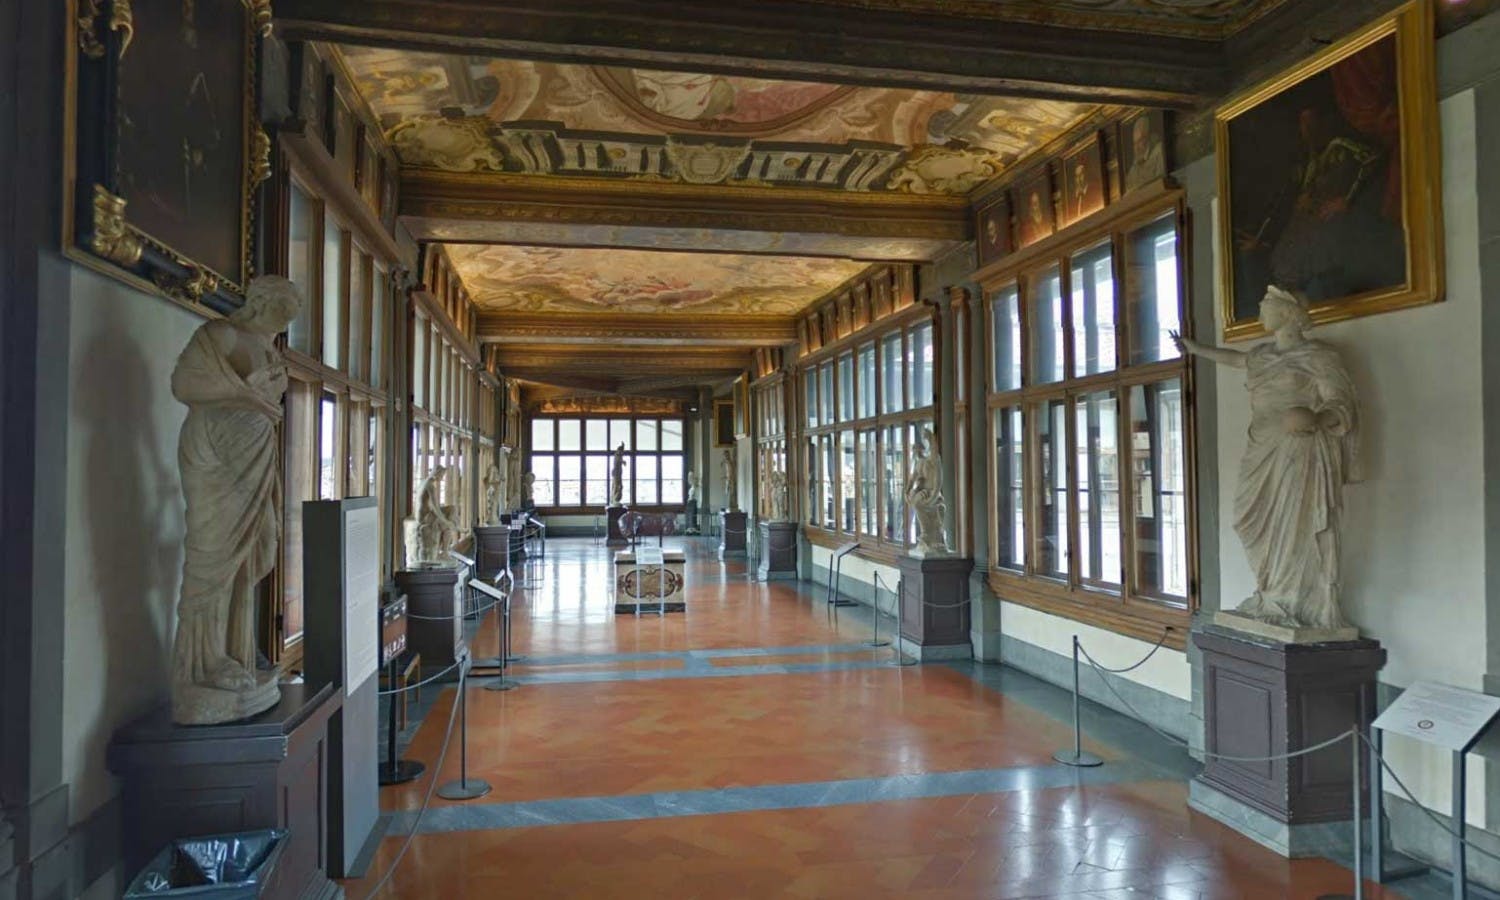 Uffizi Gallery: skip-the-line tickets and morning guided visit-5